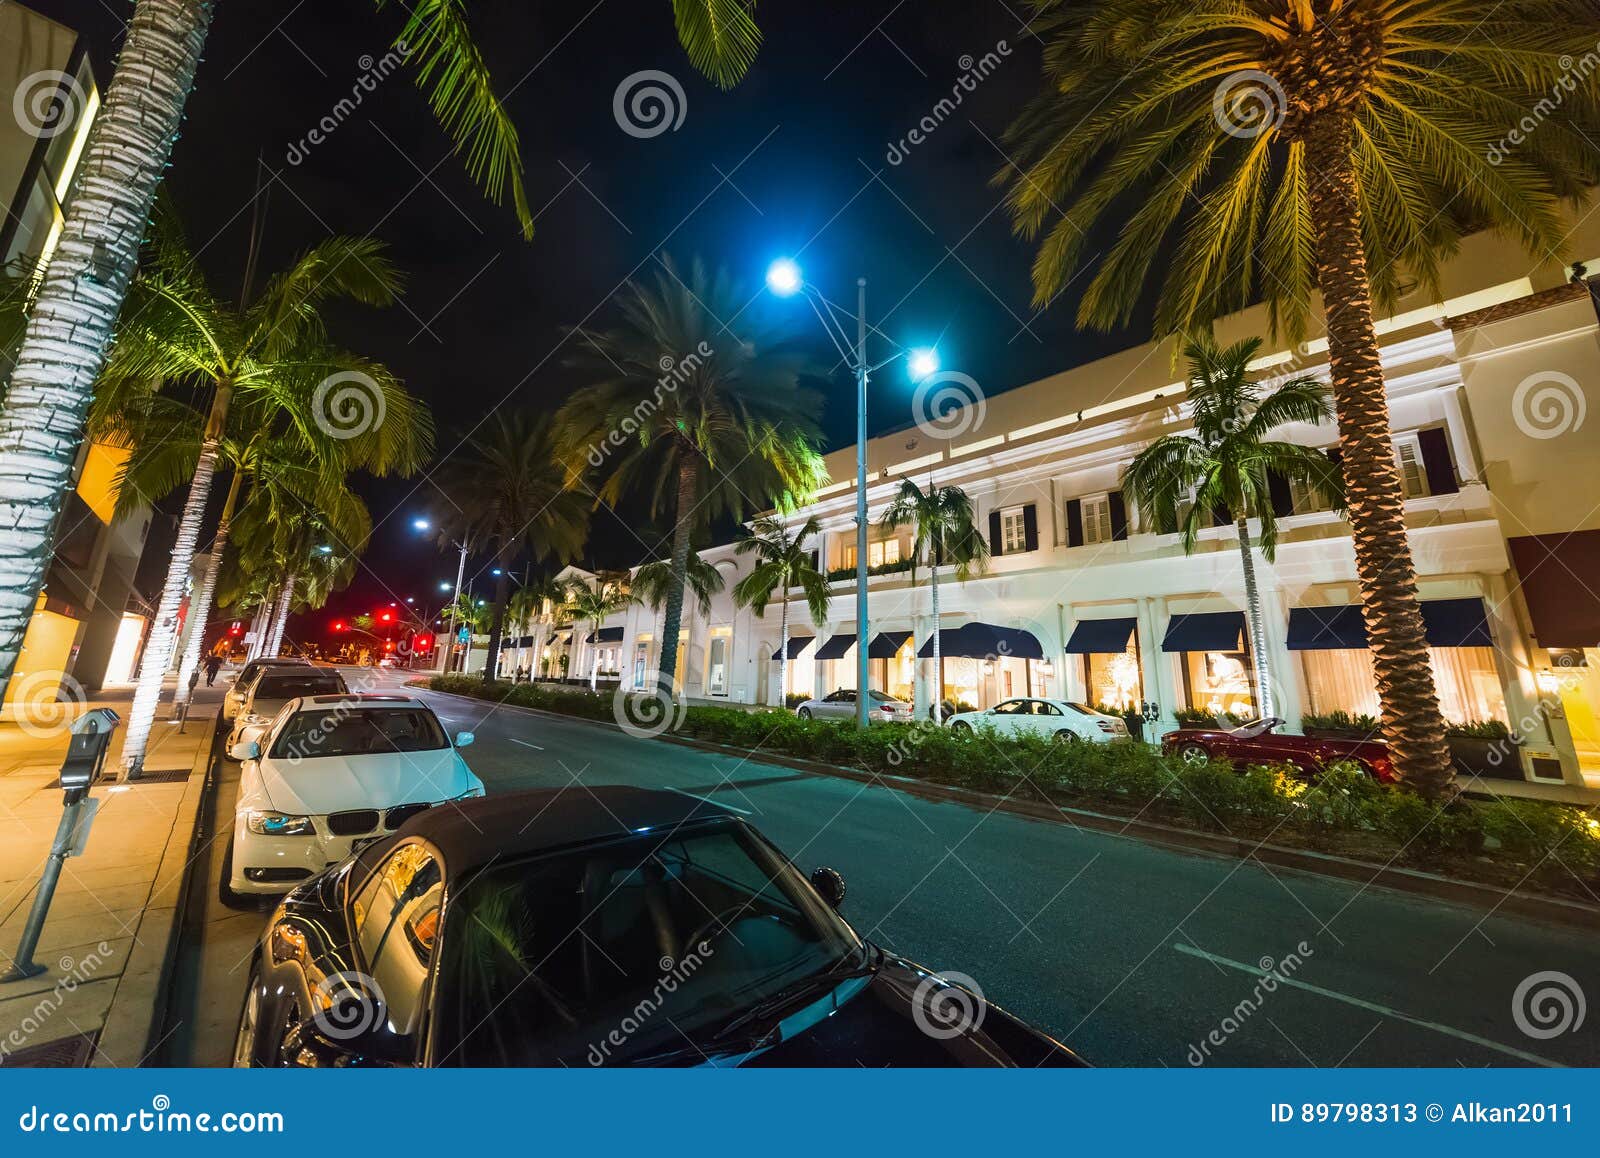 Rodeo drive by night stock image. Image of luxury, lifestyle